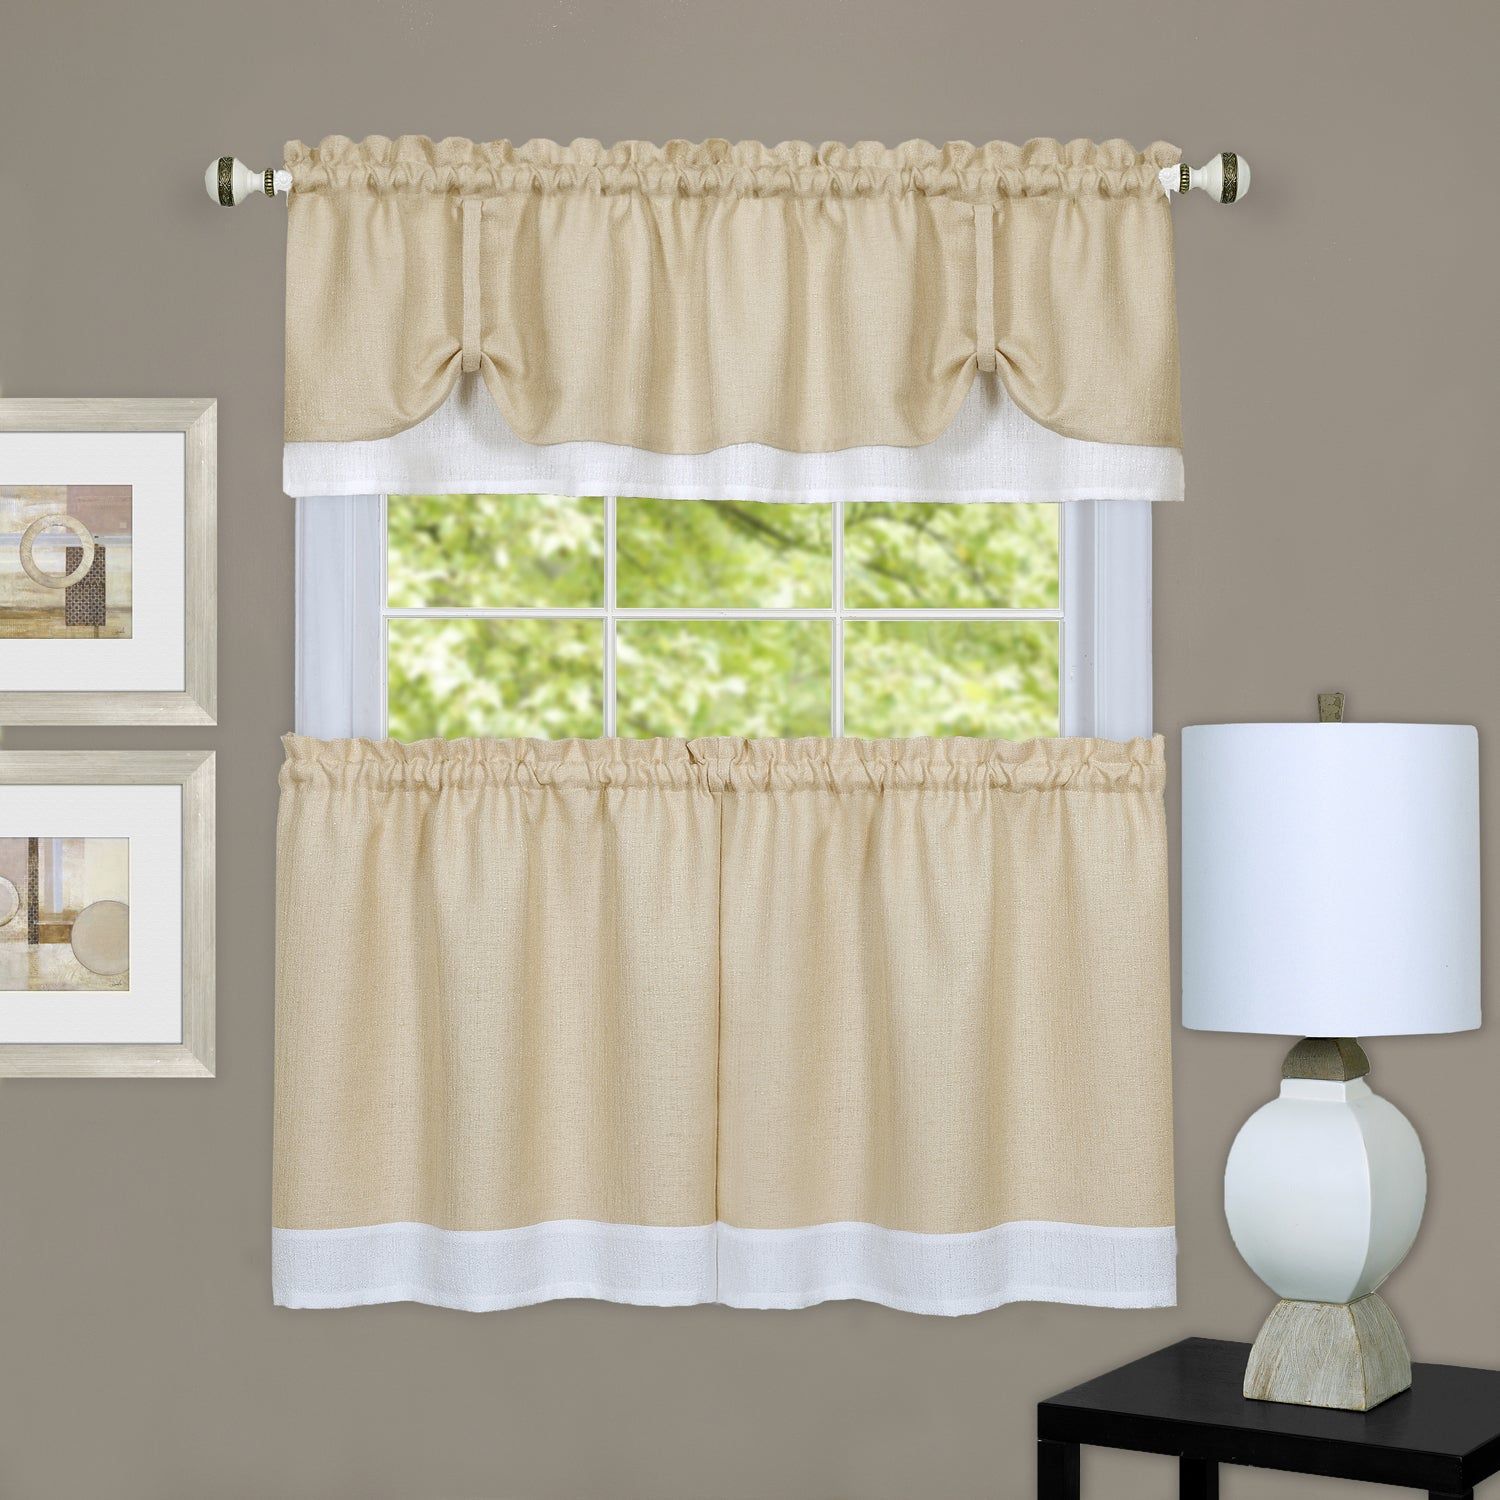 Details About Double Layer Tie Up Tan/ White 3 Piece Tier And Valance  Window Curtain Set In Barnyard Window Curtain Tier Pair And Valance Sets (View 15 of 20)